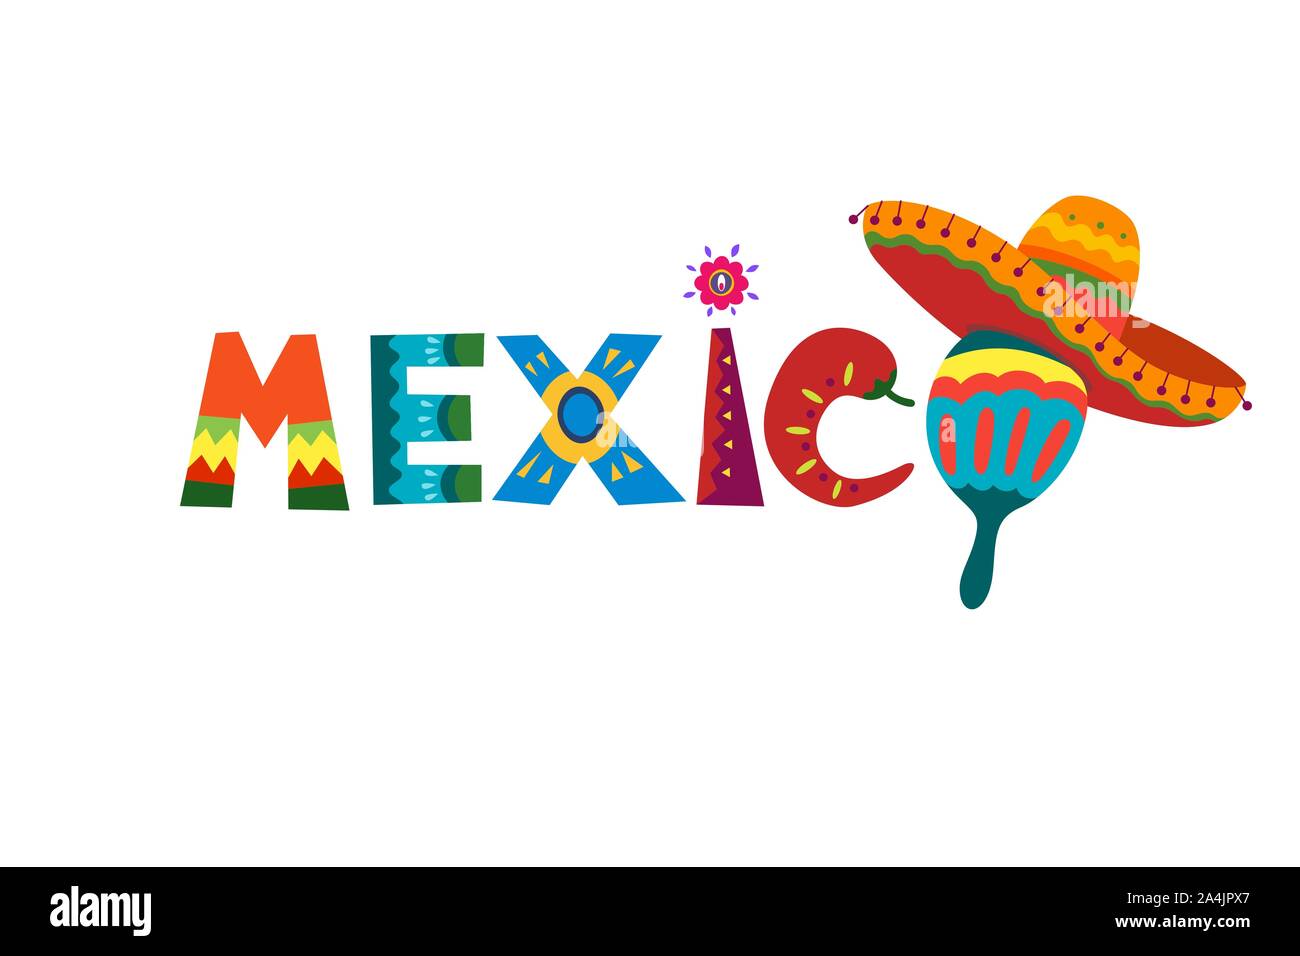 Mexico word in Mexican traditional ornament text for festive card or invitation design. Bright element sun with fiesta style chilli and sombrero. Colorful ethnic lettering vector illustration Stock Vector